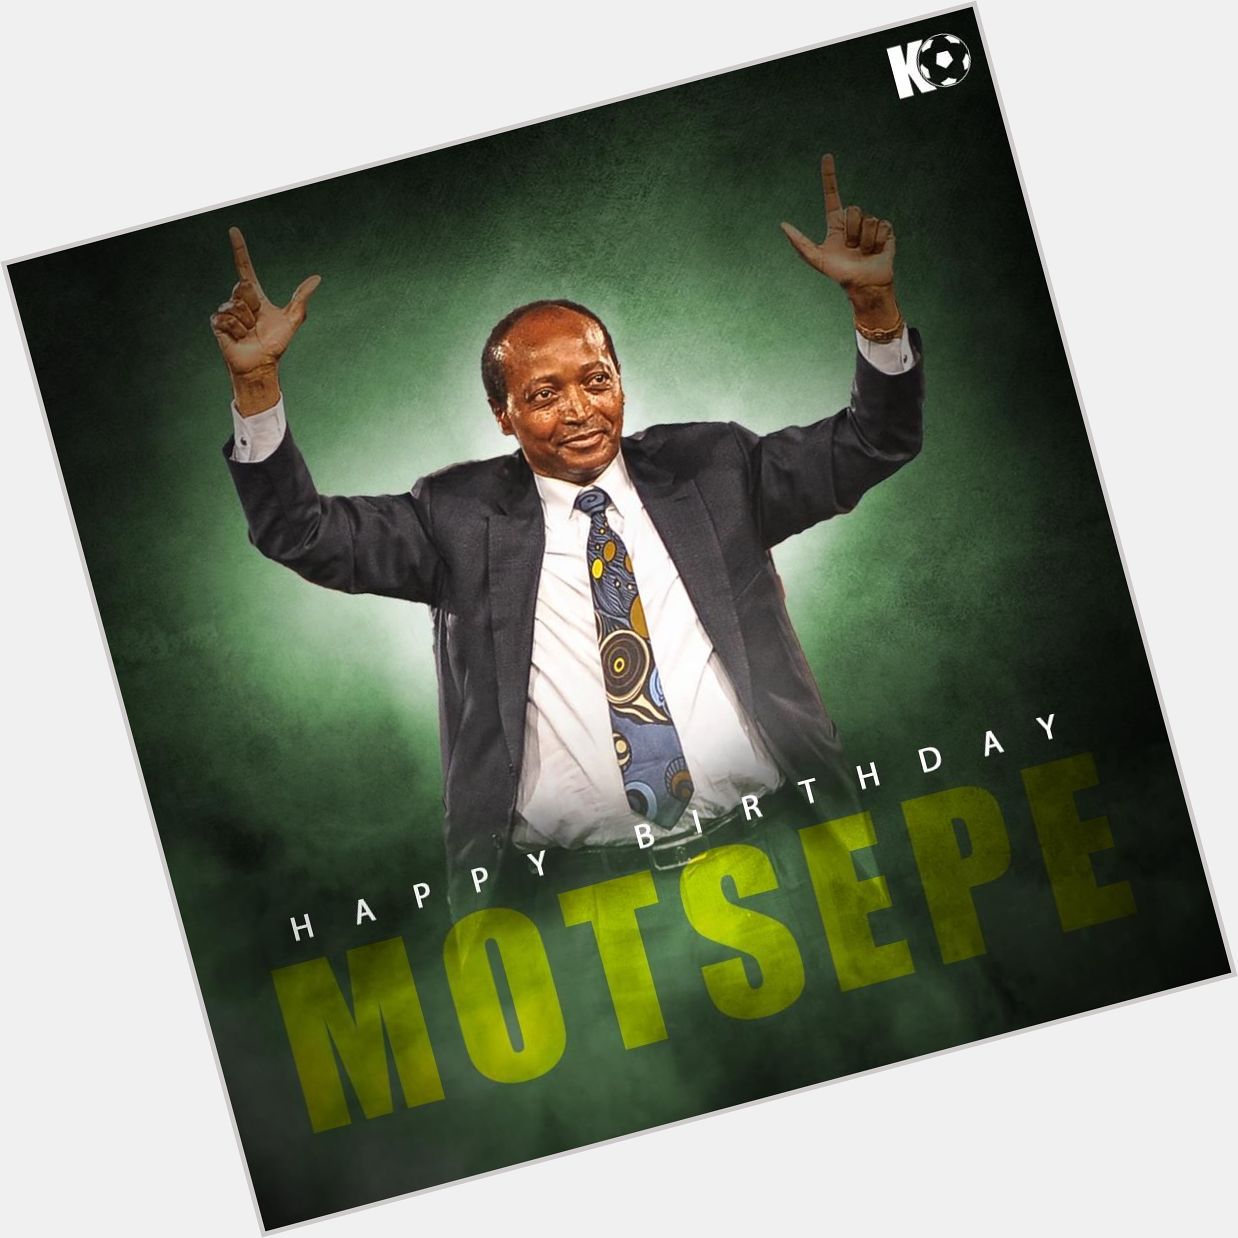 To the man who brought us Lionel Messi and Beyonce! Join in wishing Patrice Motsepe a Happy Birthday! 